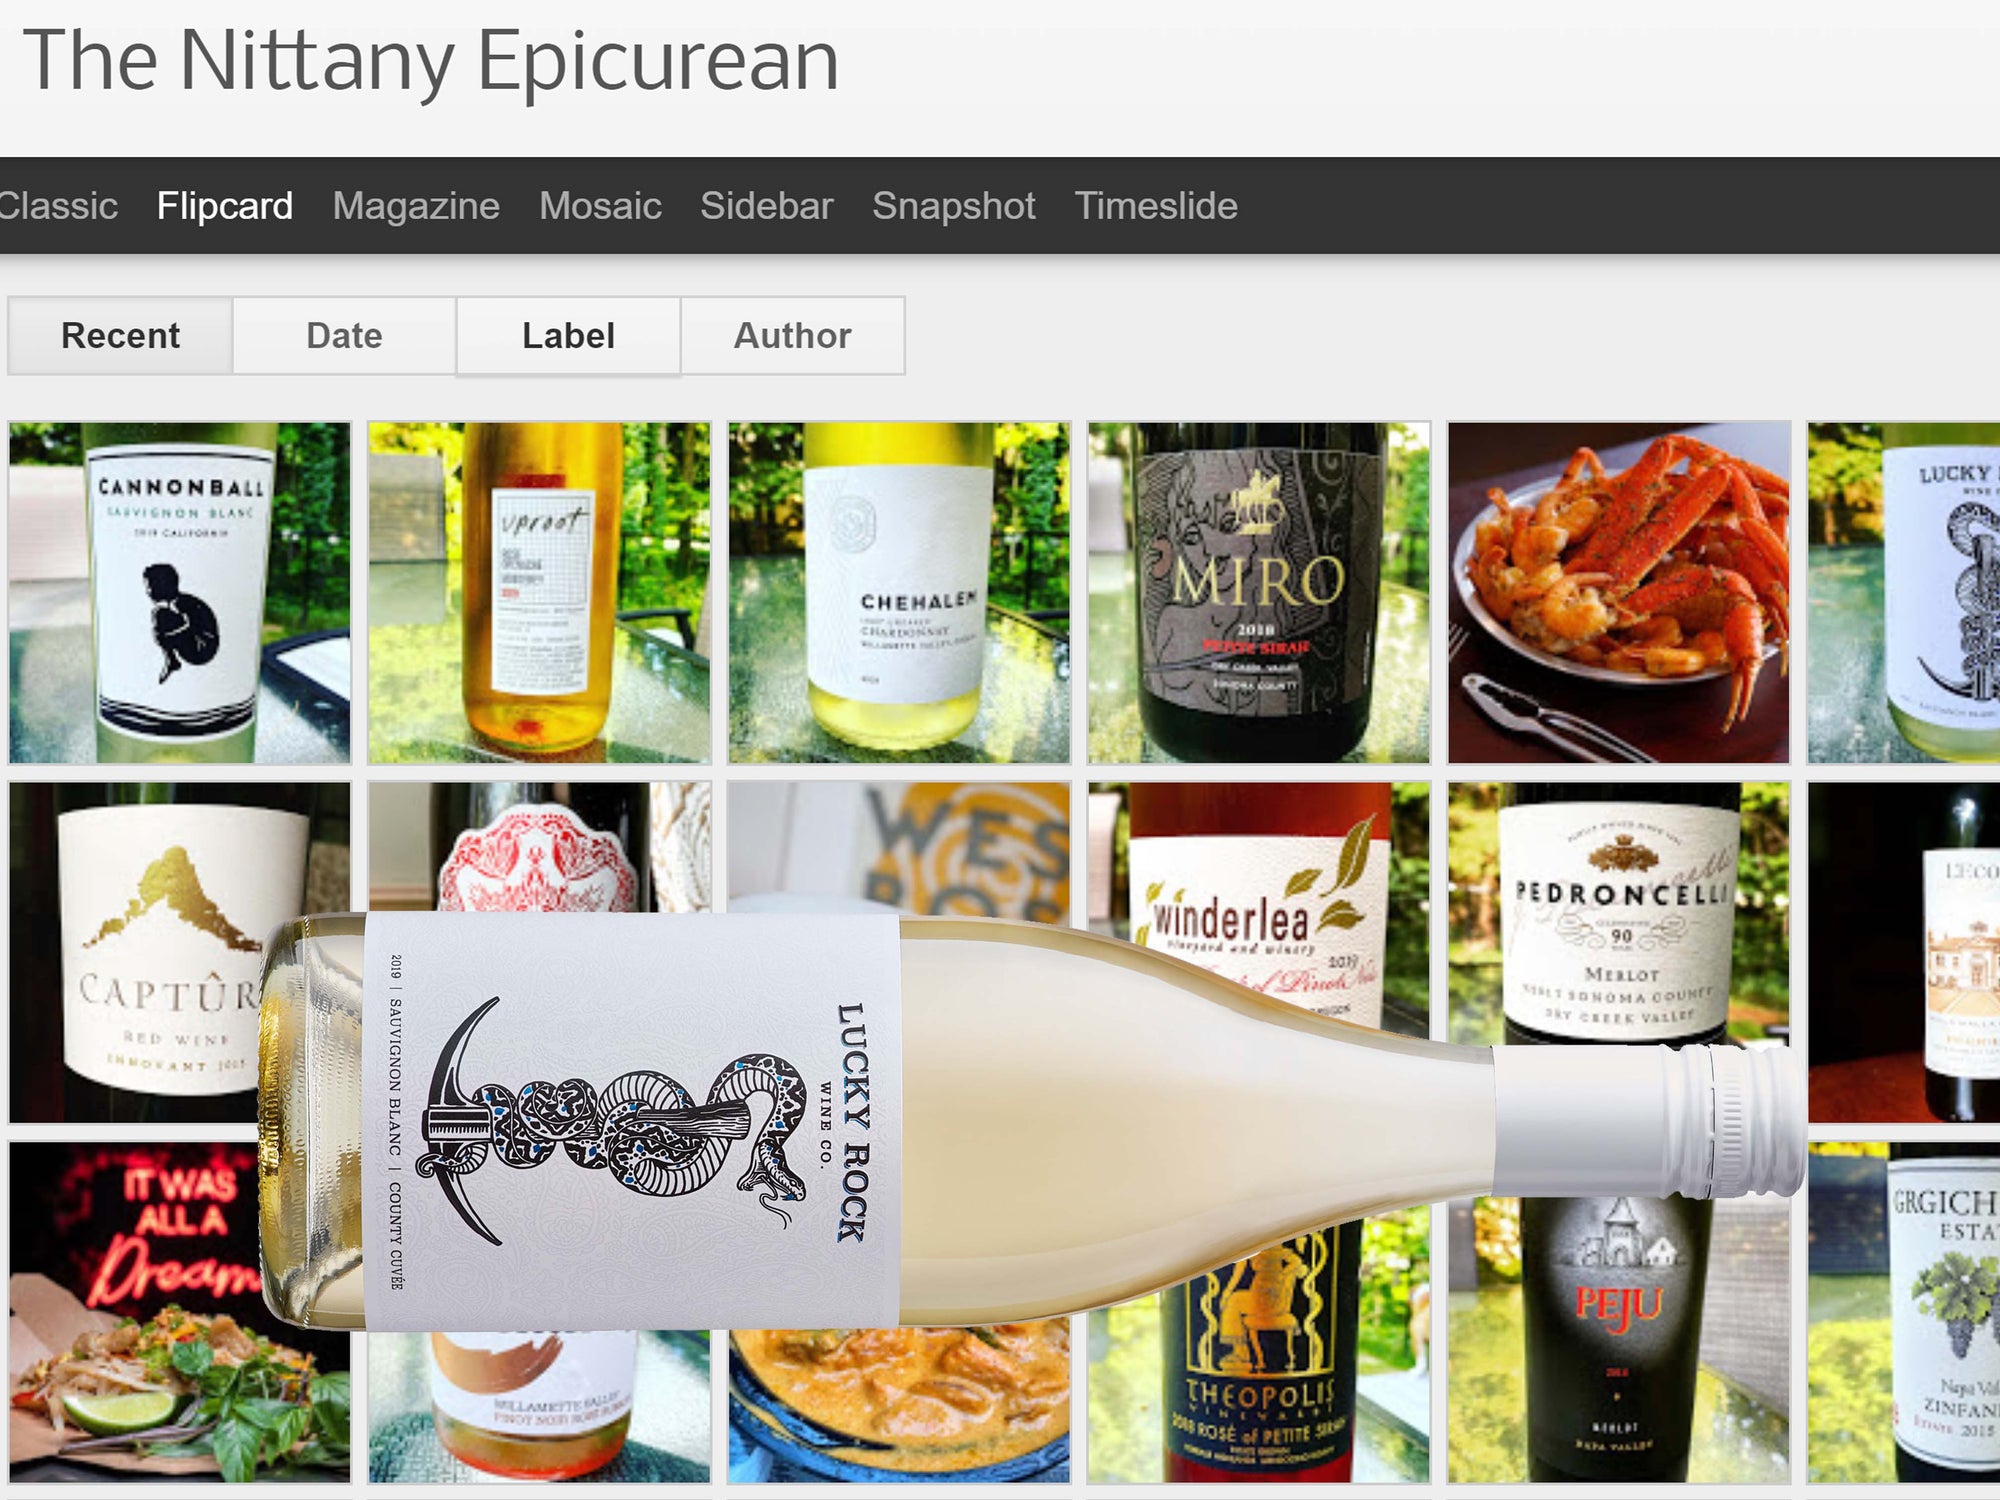 The Nittany Epicurean's 2019 Lucky Rock Sauvignon Blanc Review